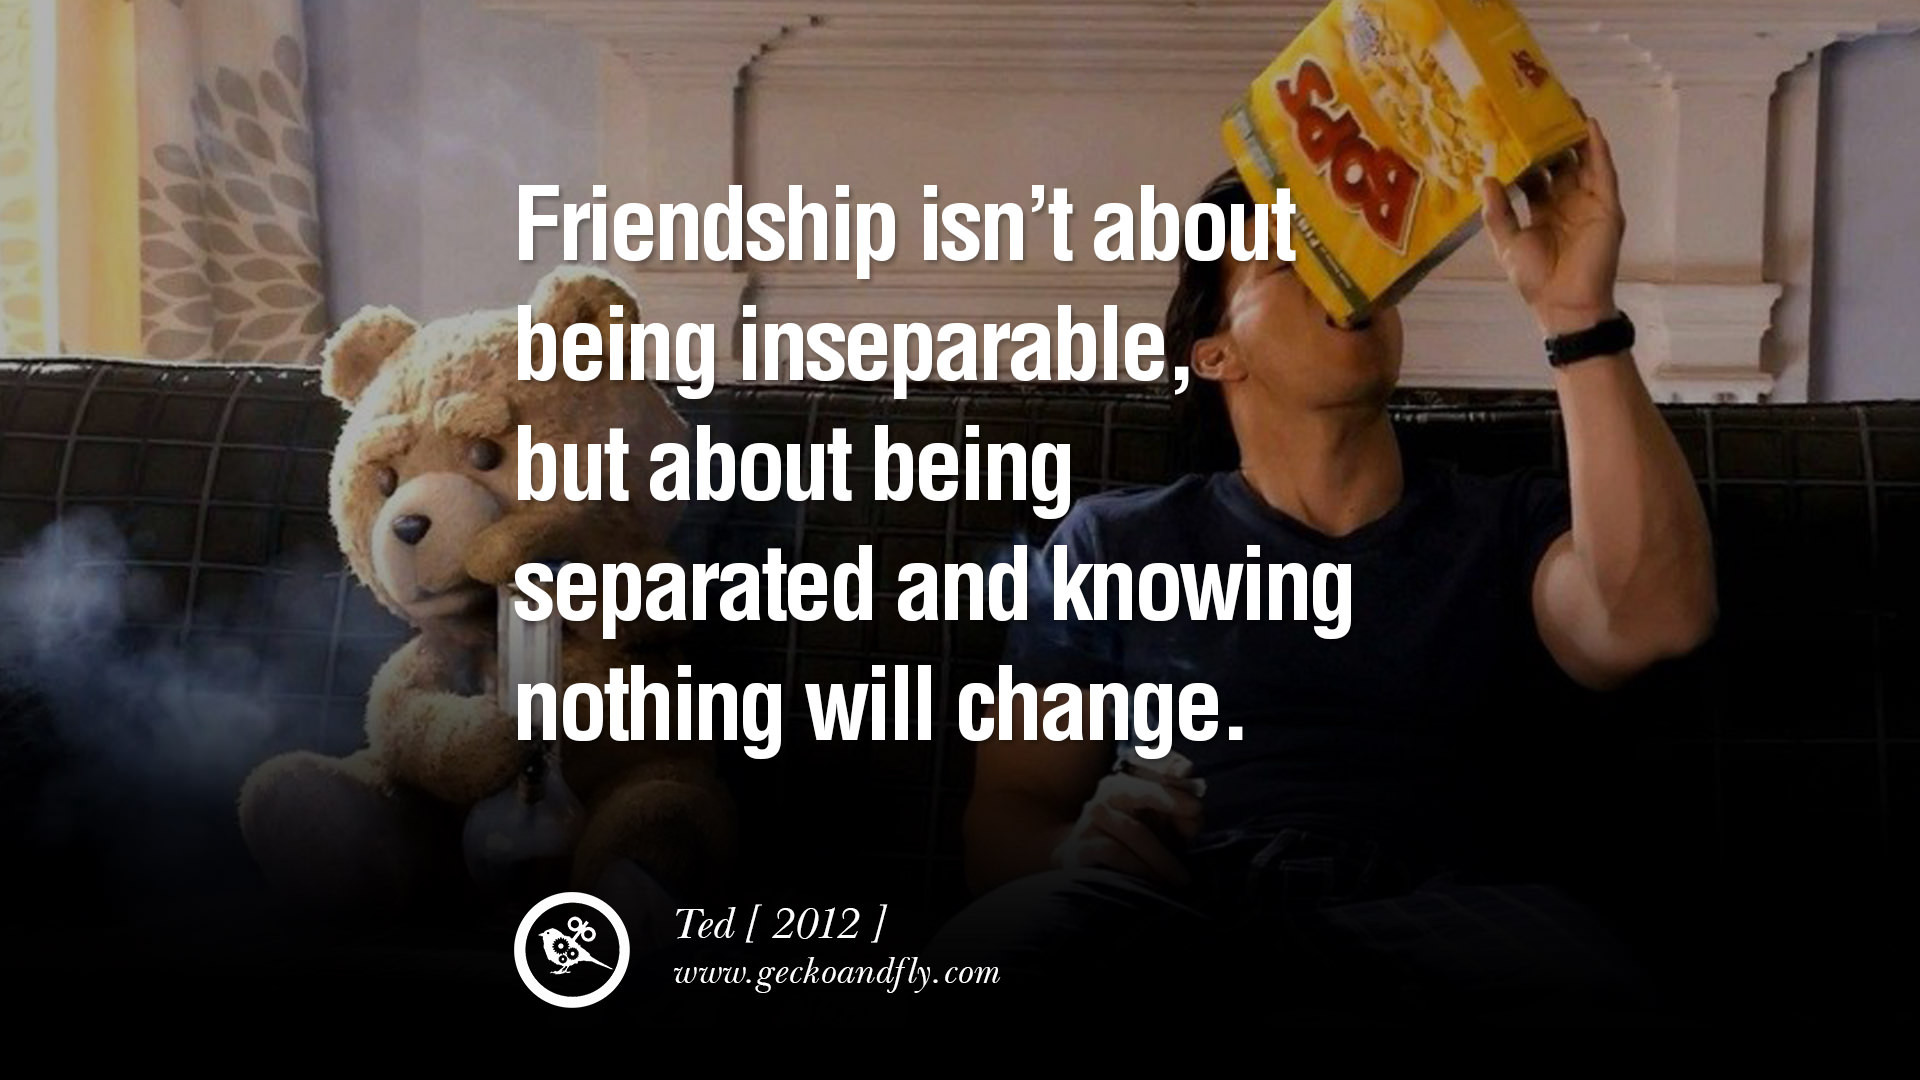 Movie Quotes About Friendship
 Movie Quotes About Friendship – Quotesta